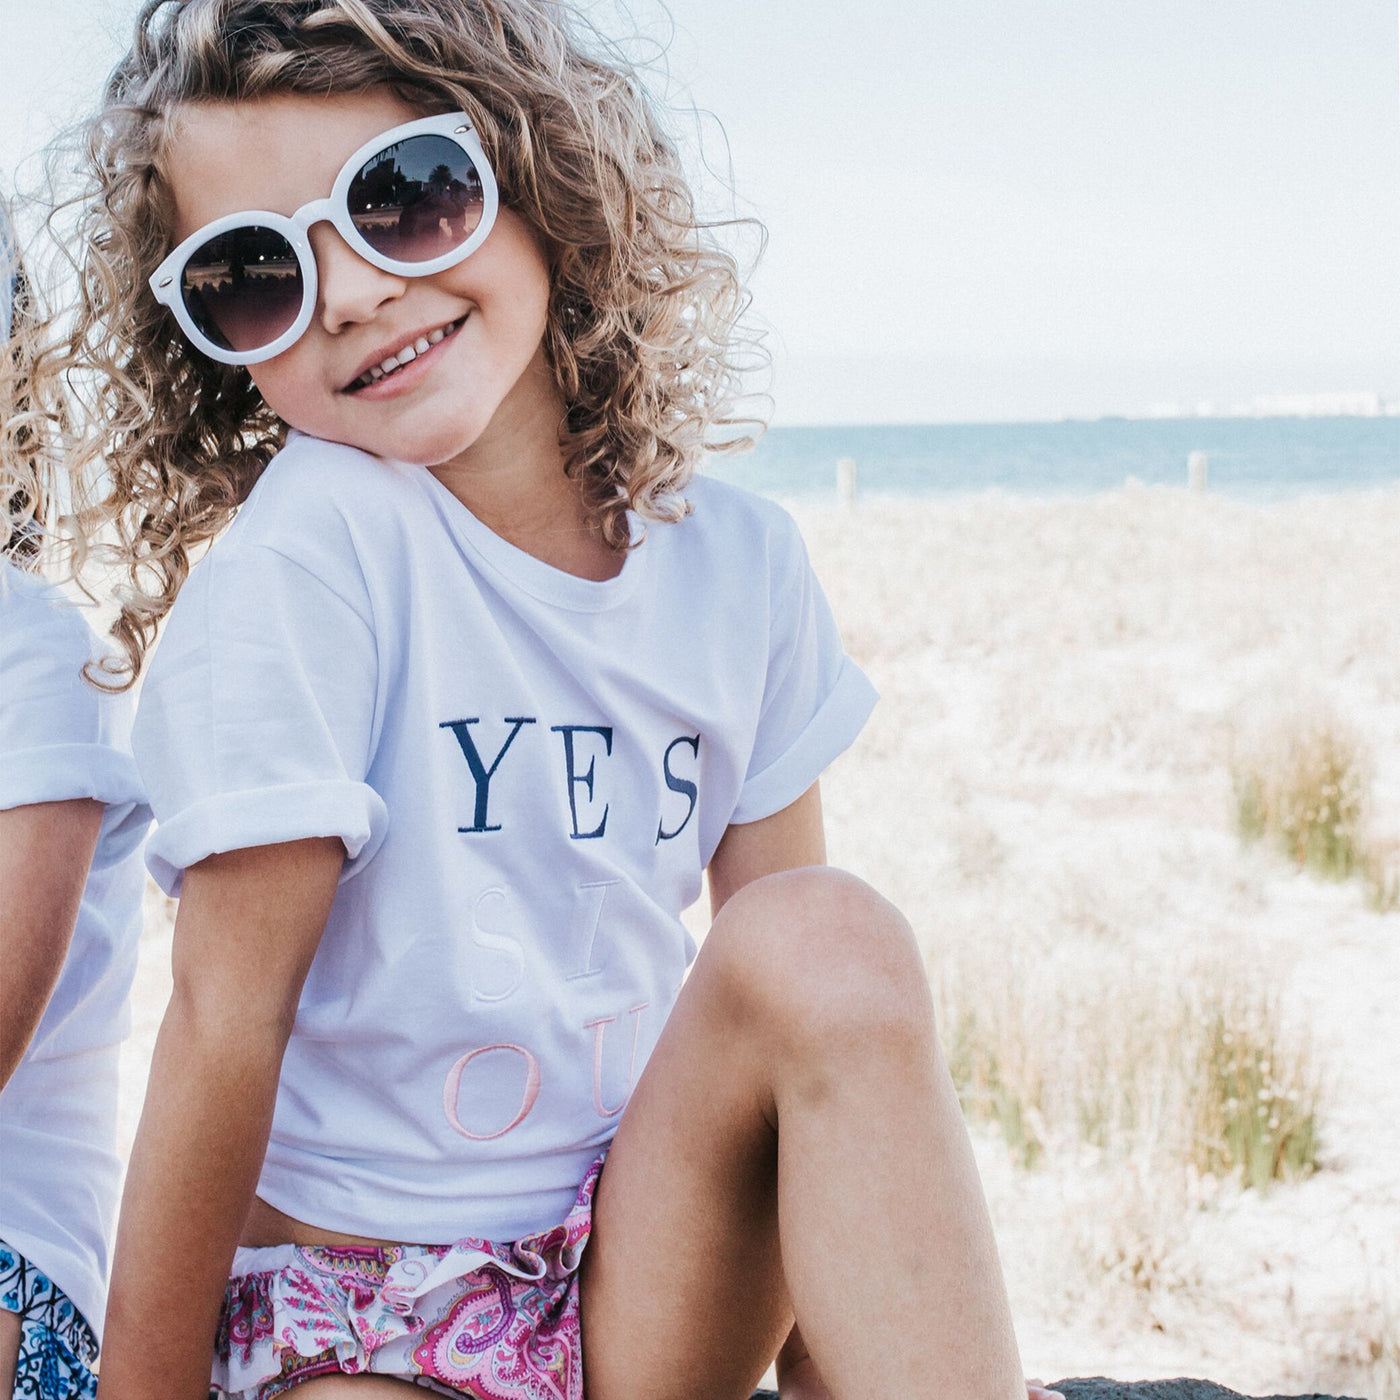 Girls T-Shirt - Yes Si Oui - Branche Store